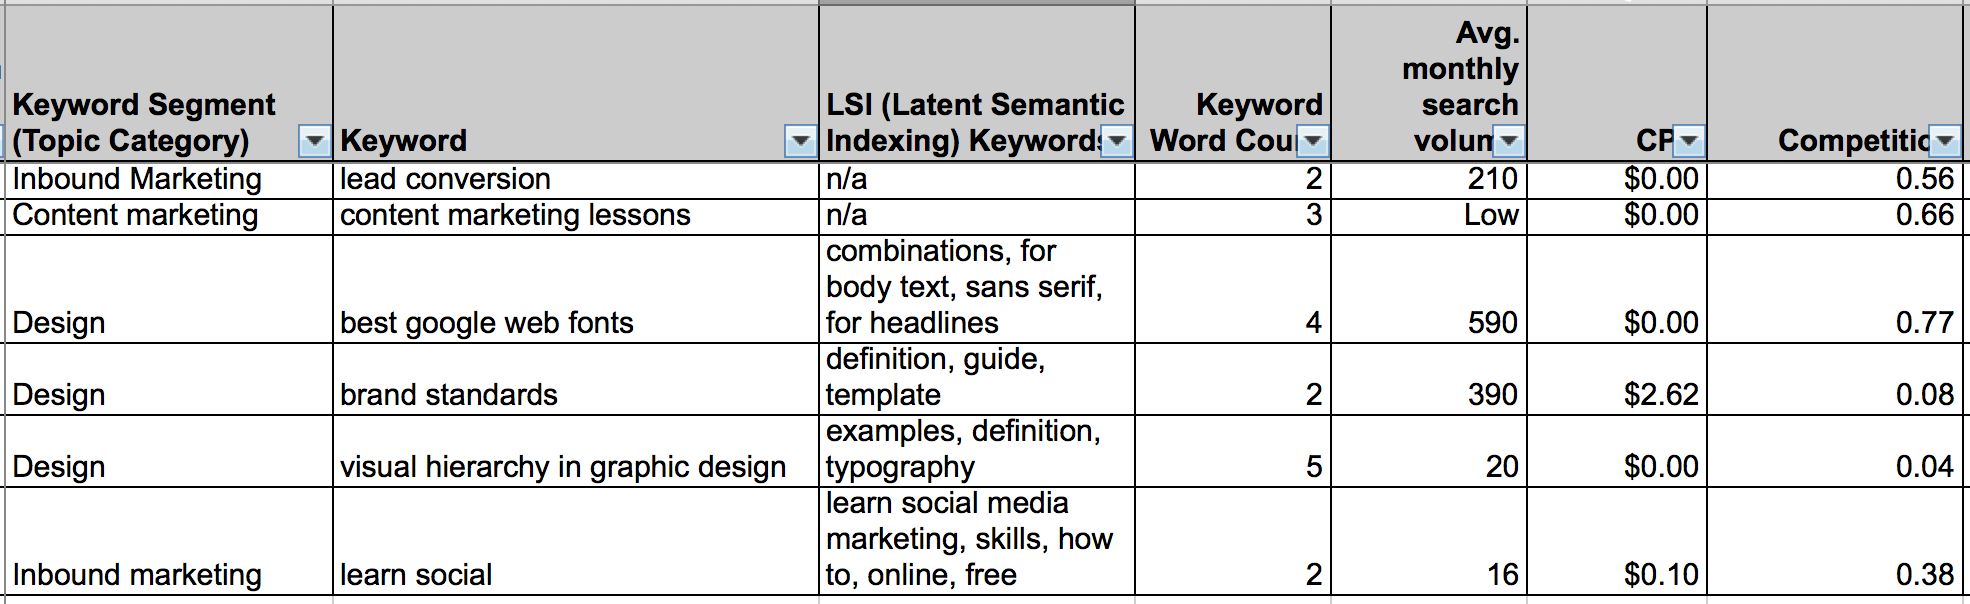 example of an excel sheet listing keywords and how they rank